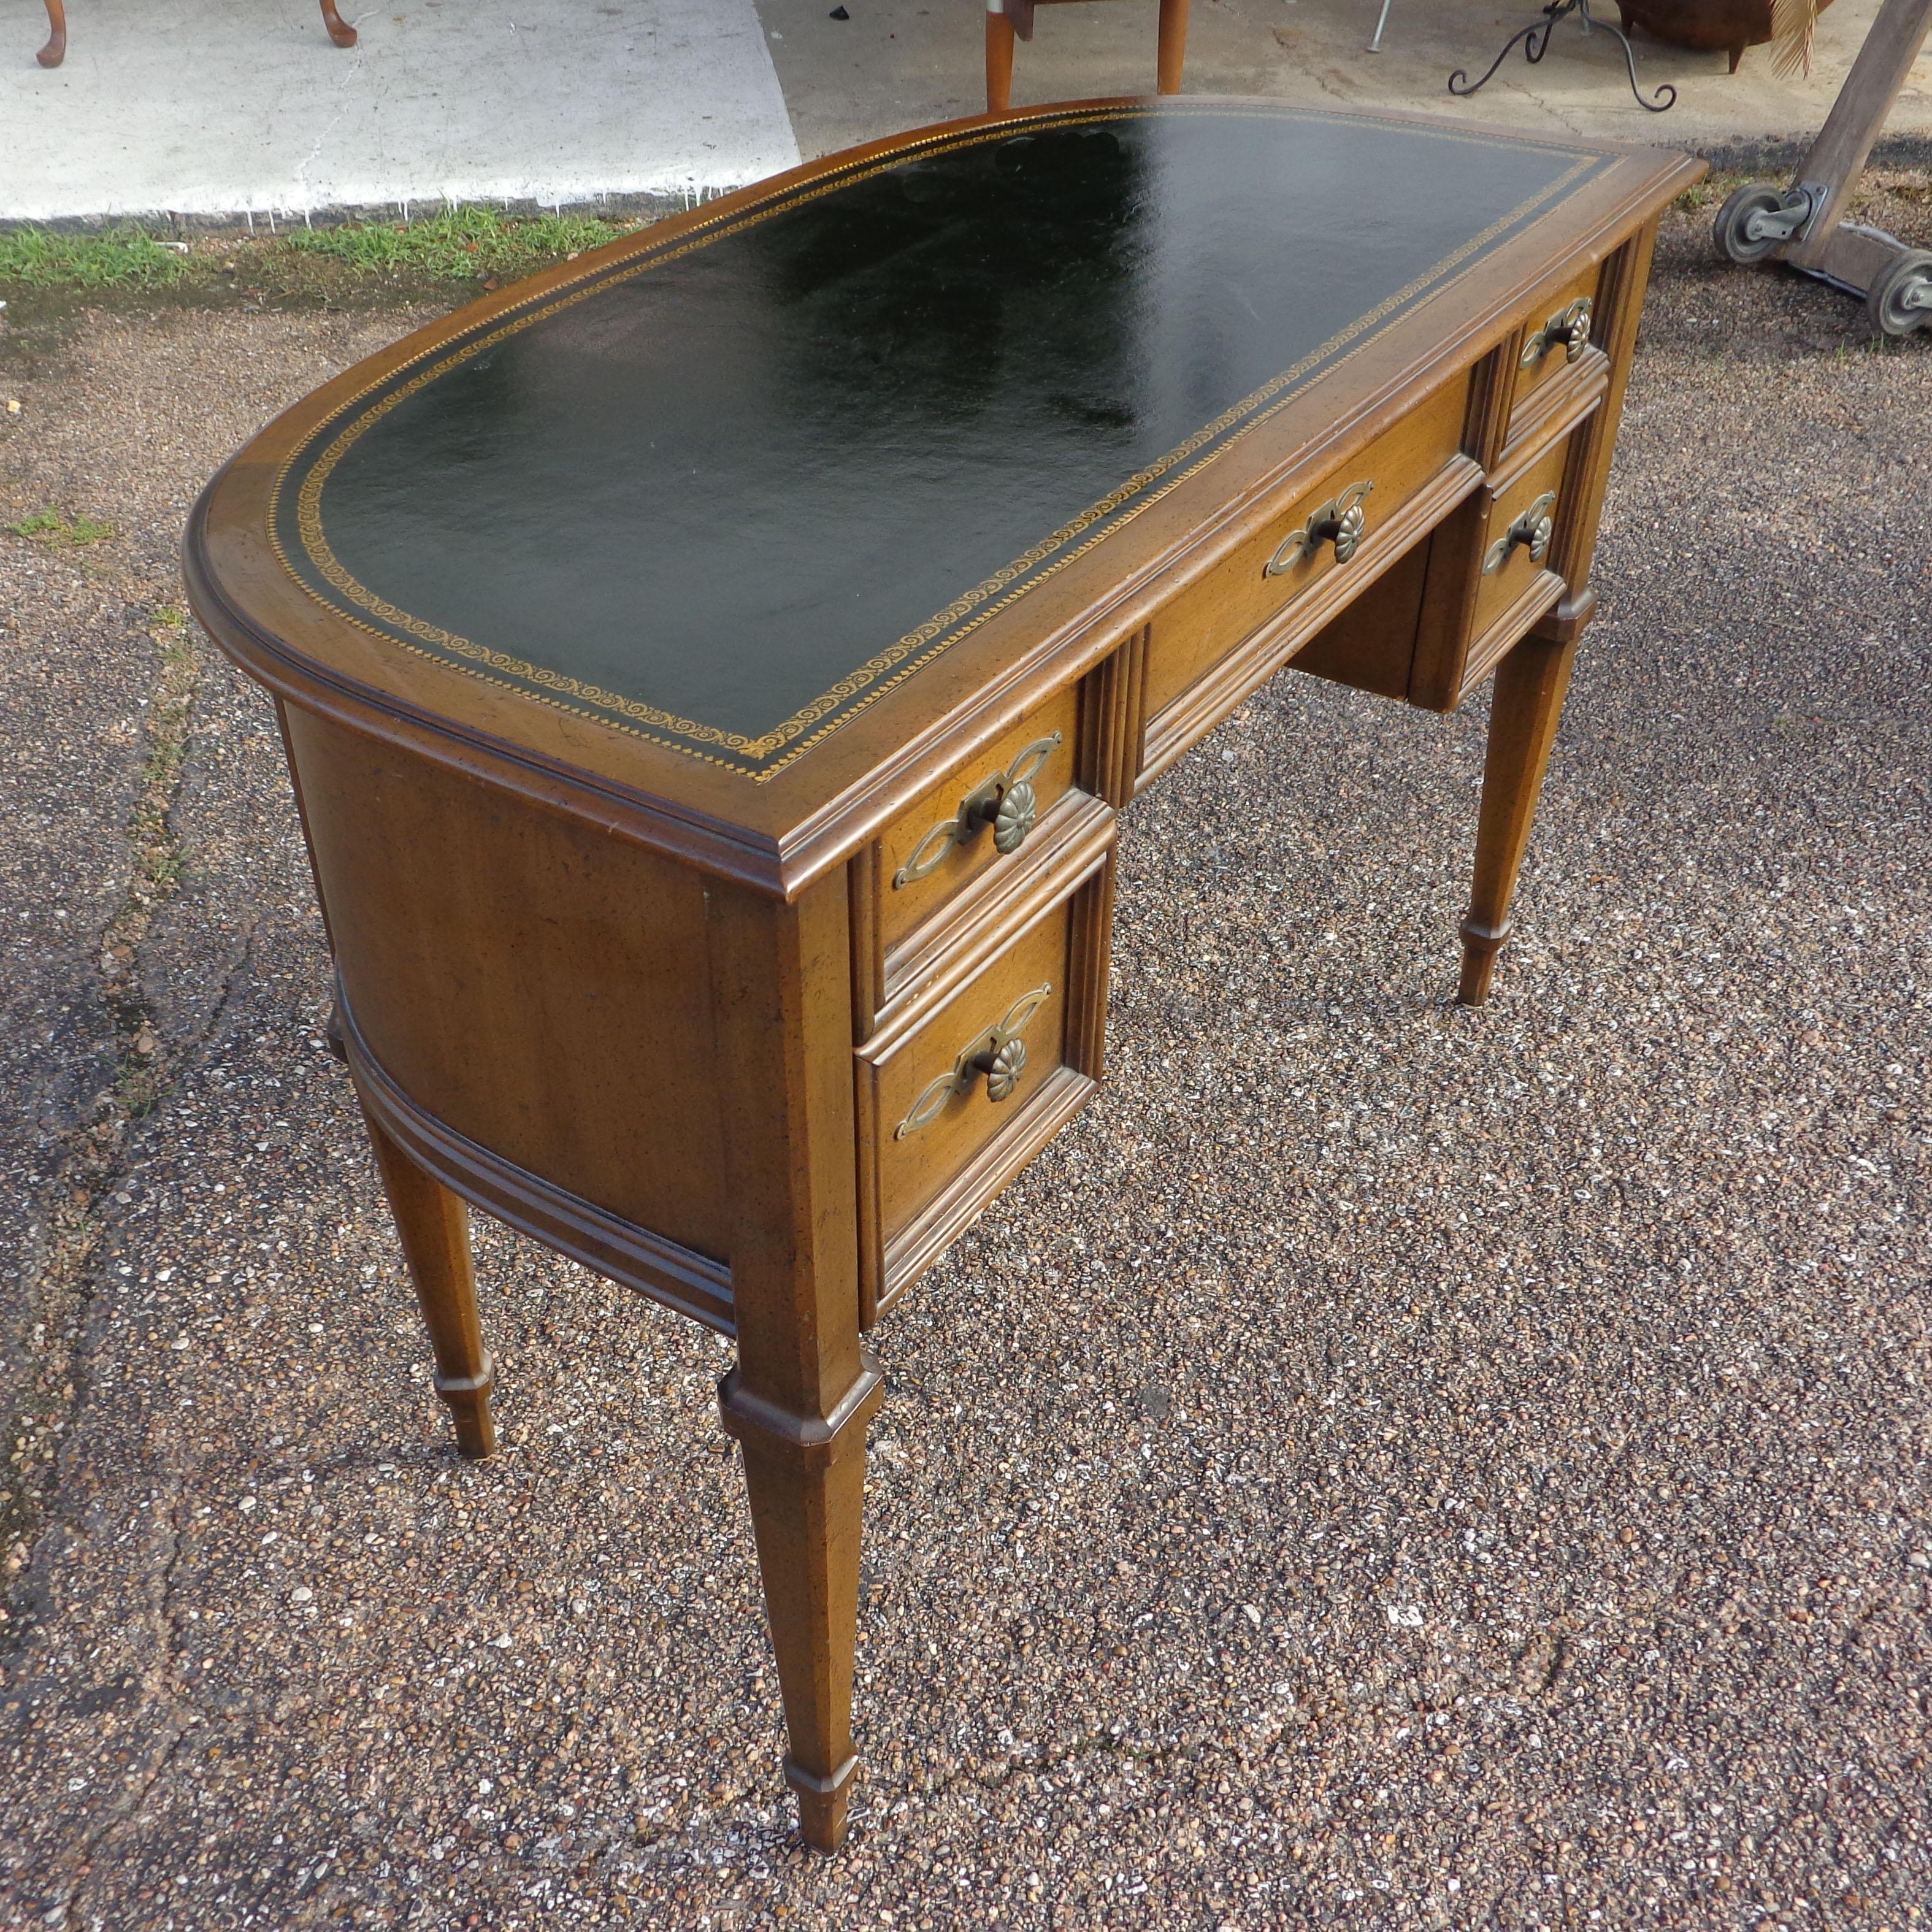 French Provencial writing desk by Sligh Furniture

Vintage leather top half moon desk by Sligh. Walnut and tooled black leather top. Five drawers with brass filigreed pulls and plates. Finished back.
 
 
Measures: Height: 29.5 inches
Width: